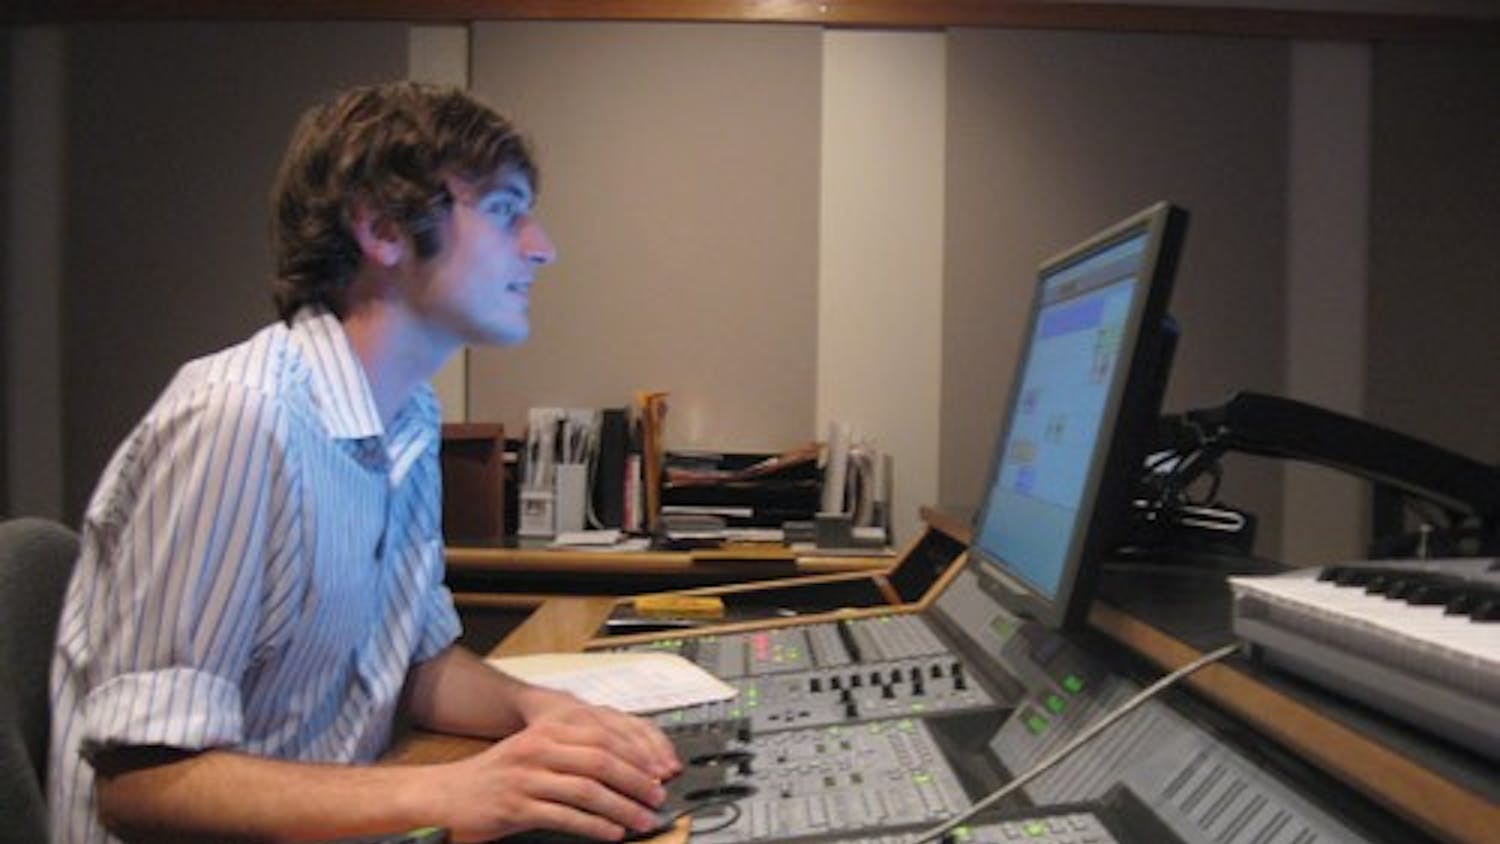 Senior recording arts major Drew Vandenberg uses Pro Tools HD3 to edit an audio project in the Simon Music Center’s state of the art mixing and editing studio, M354.